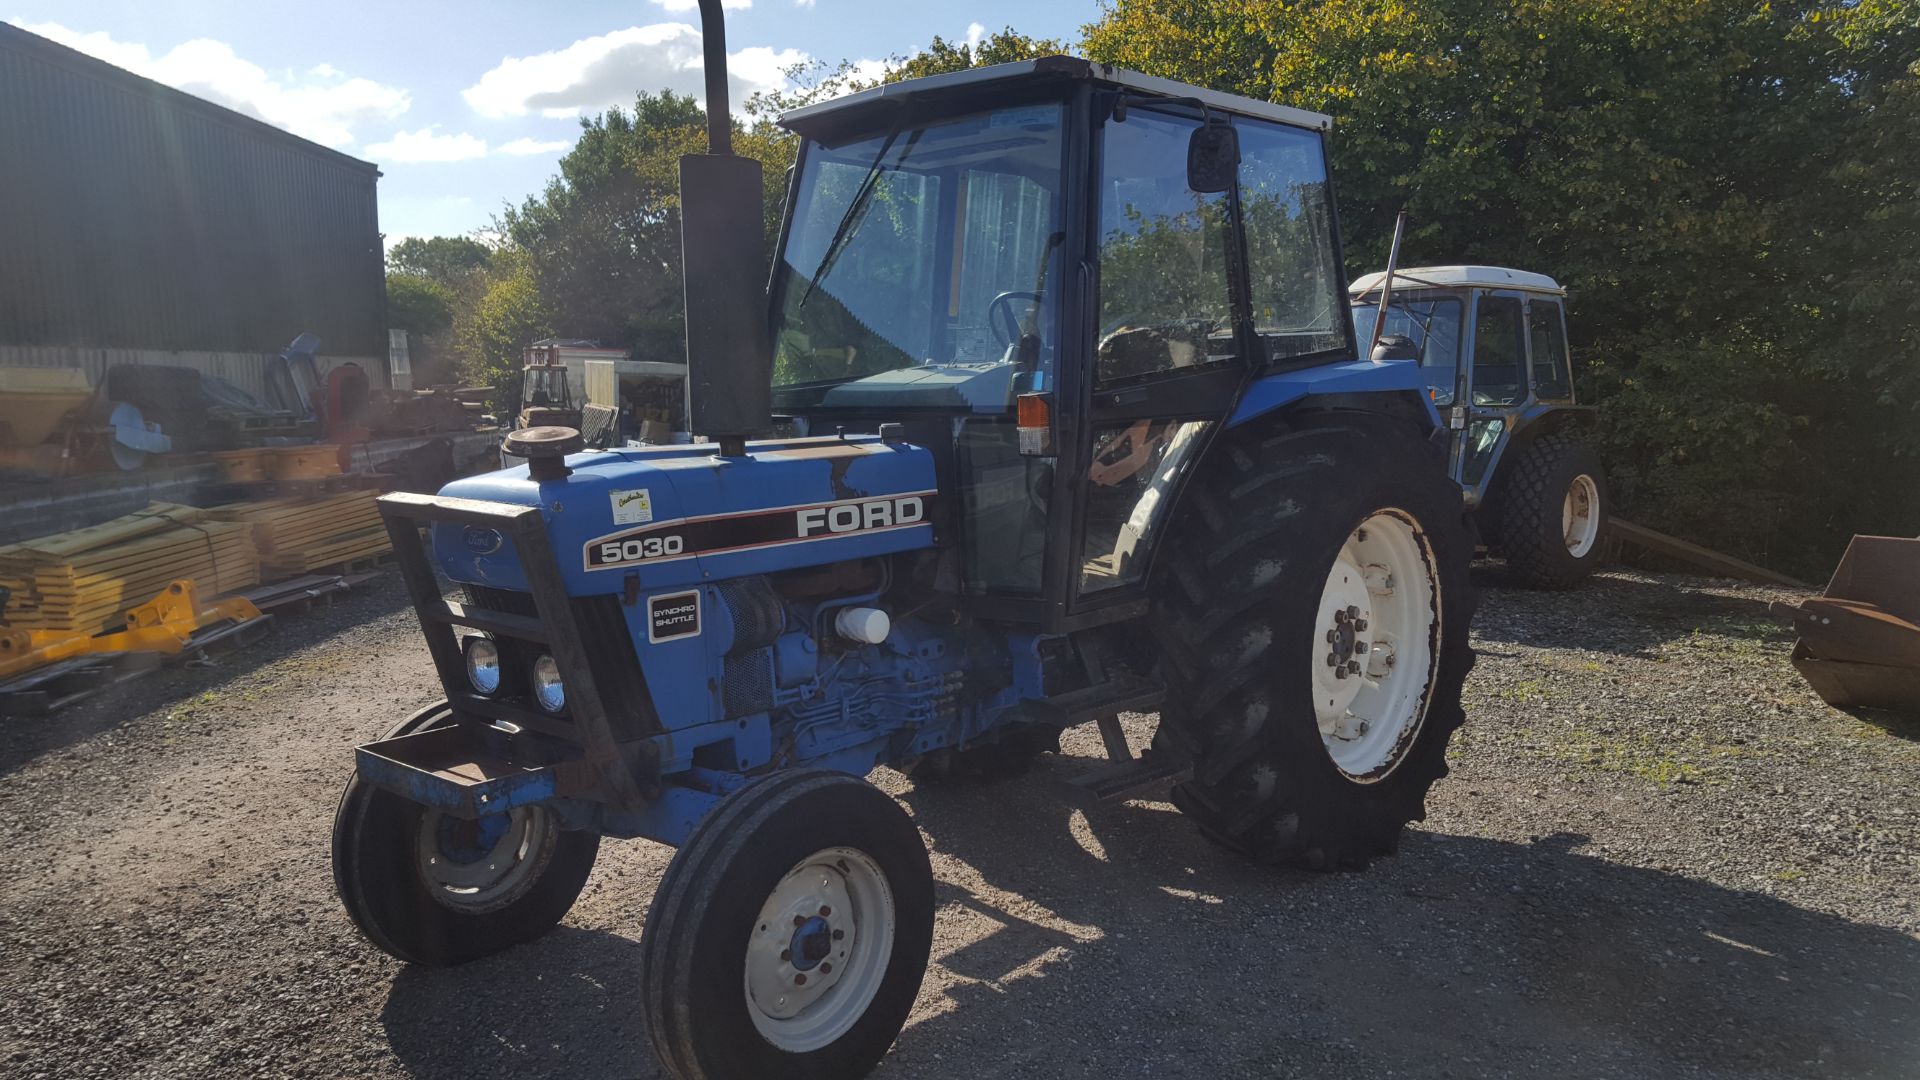 1993 / K reg Ford 5030 Tractor - Image 2 of 7